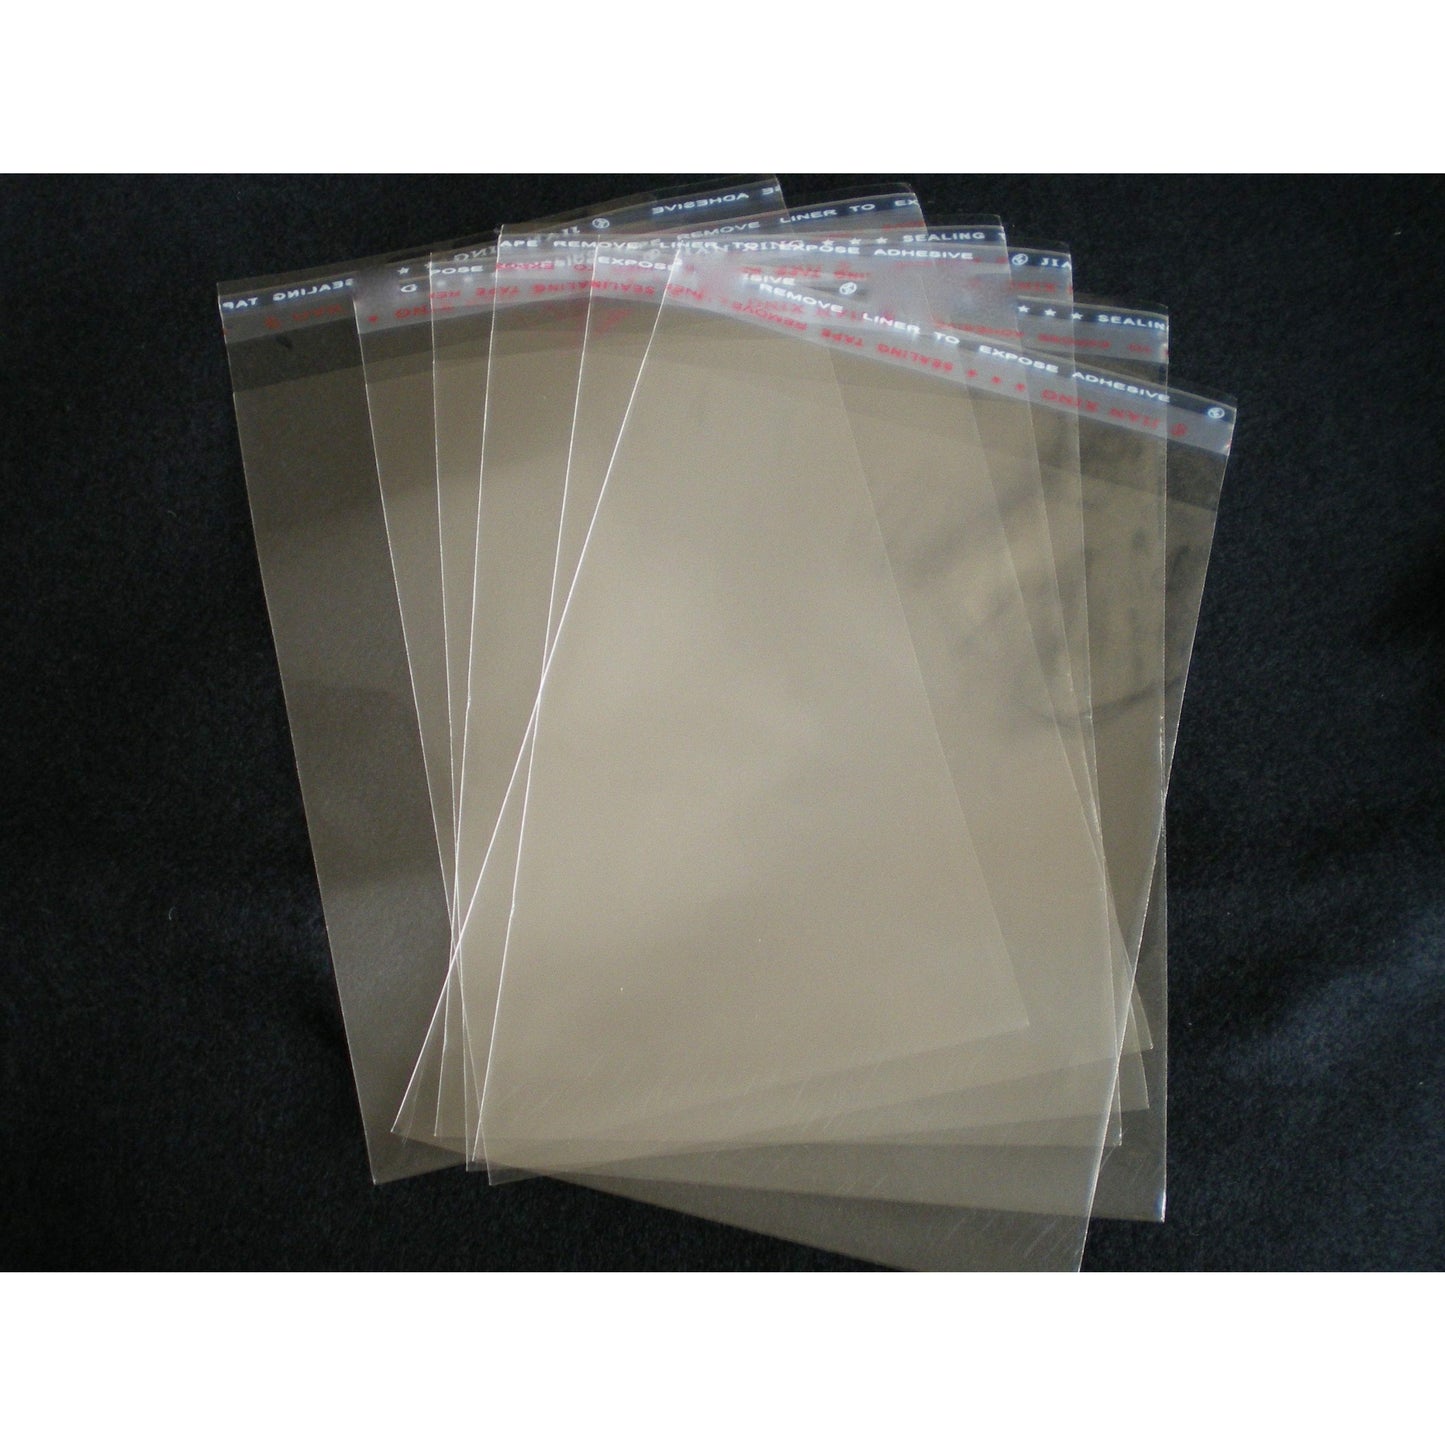 90mmx320mm Cellophane Clear Resealable Bags Pack of 100 Bags